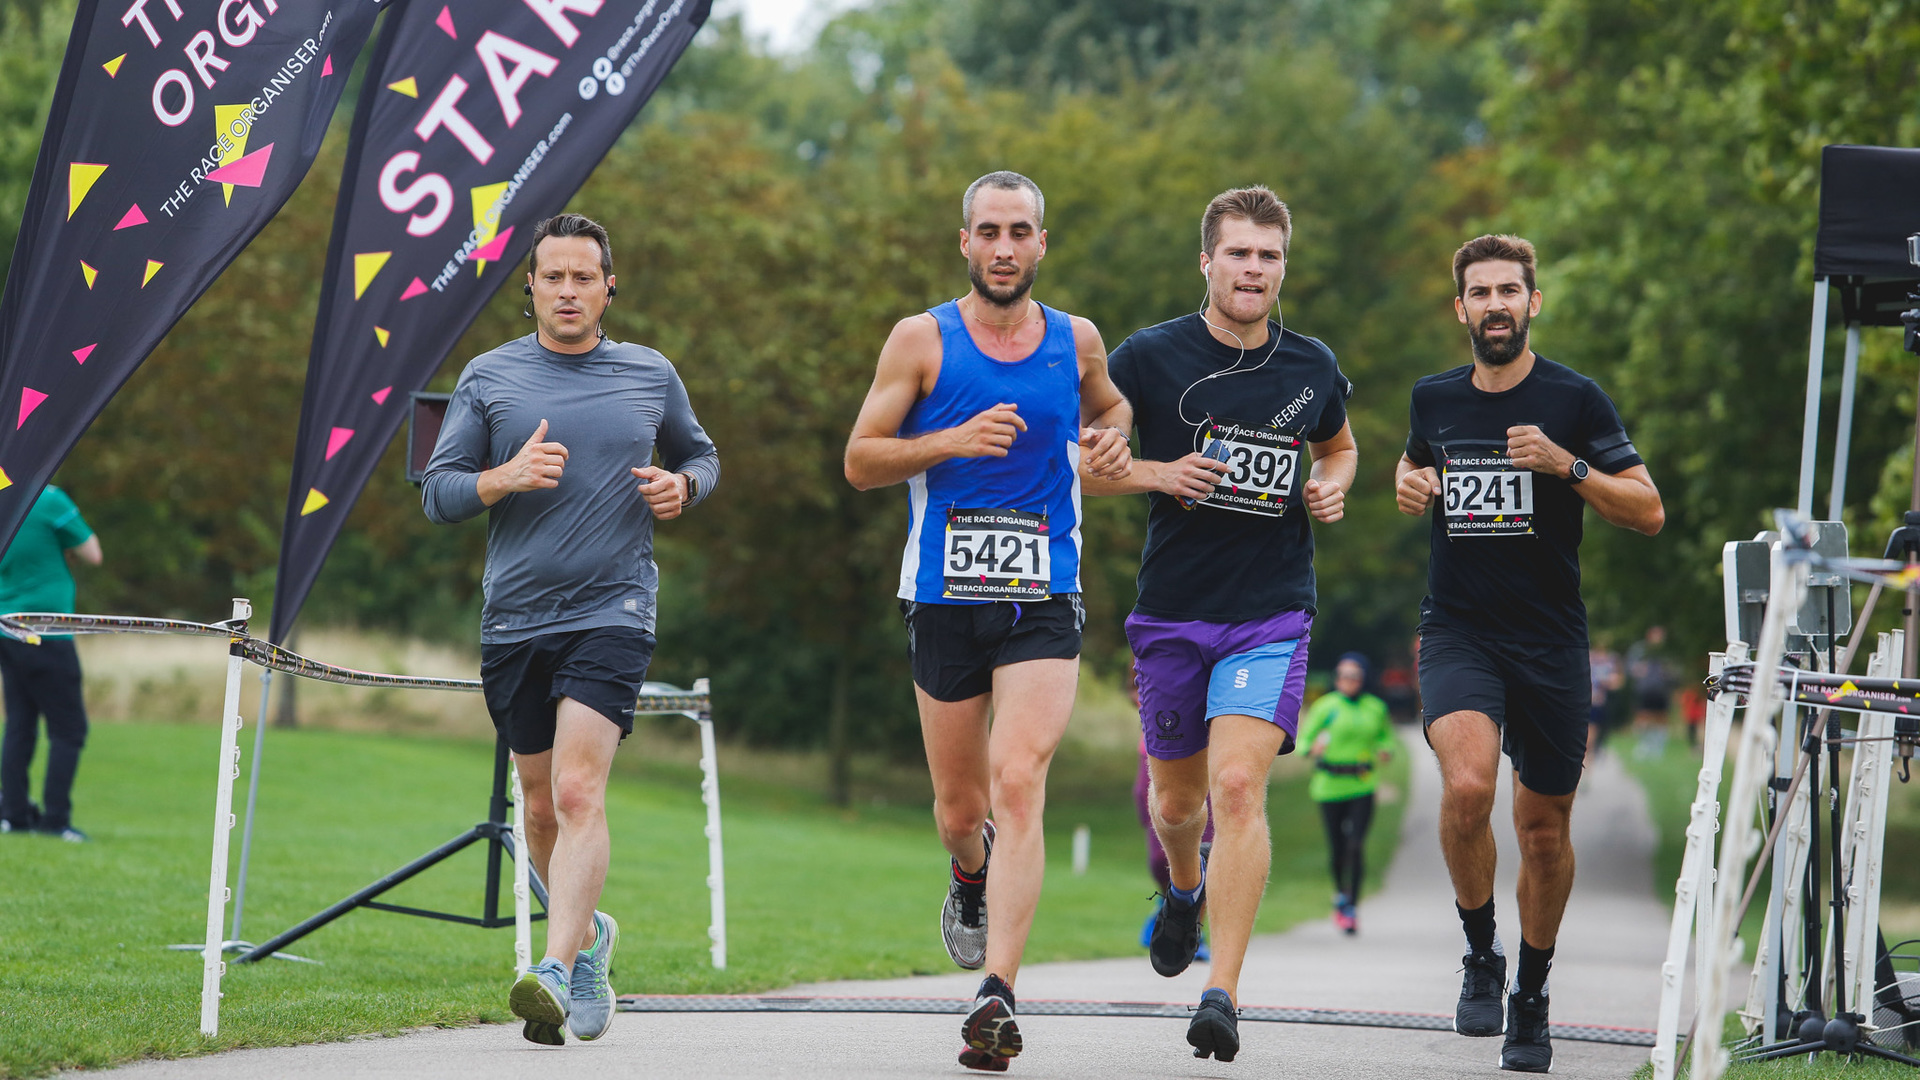 The Regent's Park 10K Winter Series by The Mornington Chasers, Greater London, England, United Kingdom